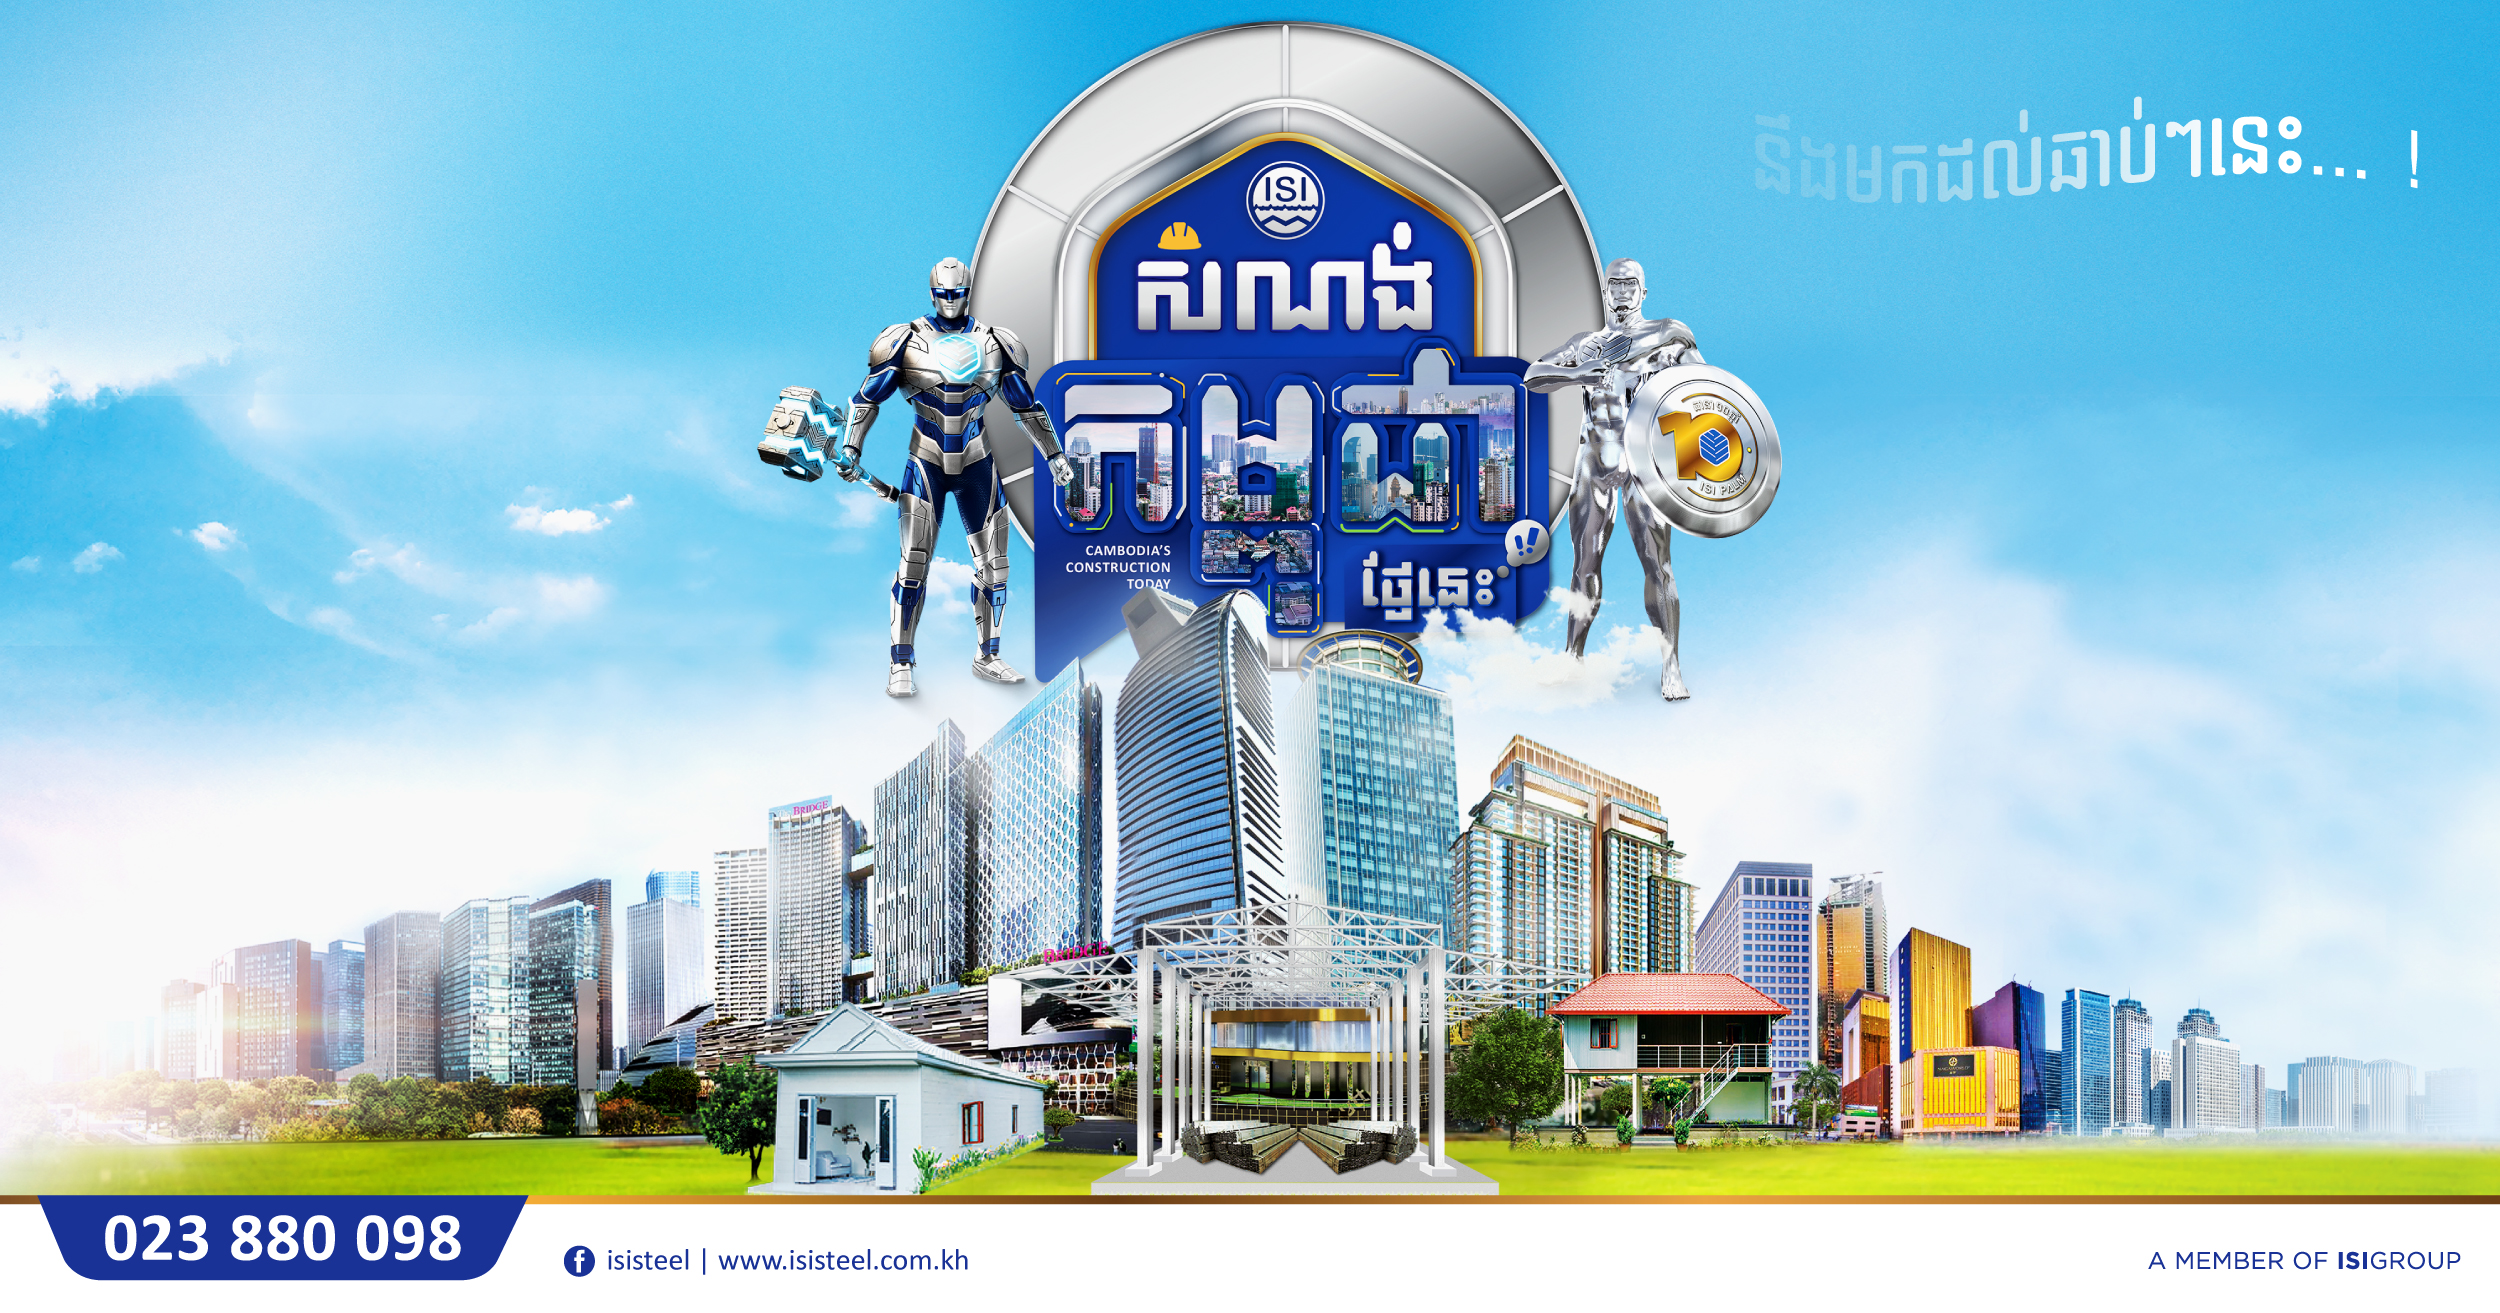 Stay up to date in the construction sector, Stay Tune with Cambodia’s Construction Today Show